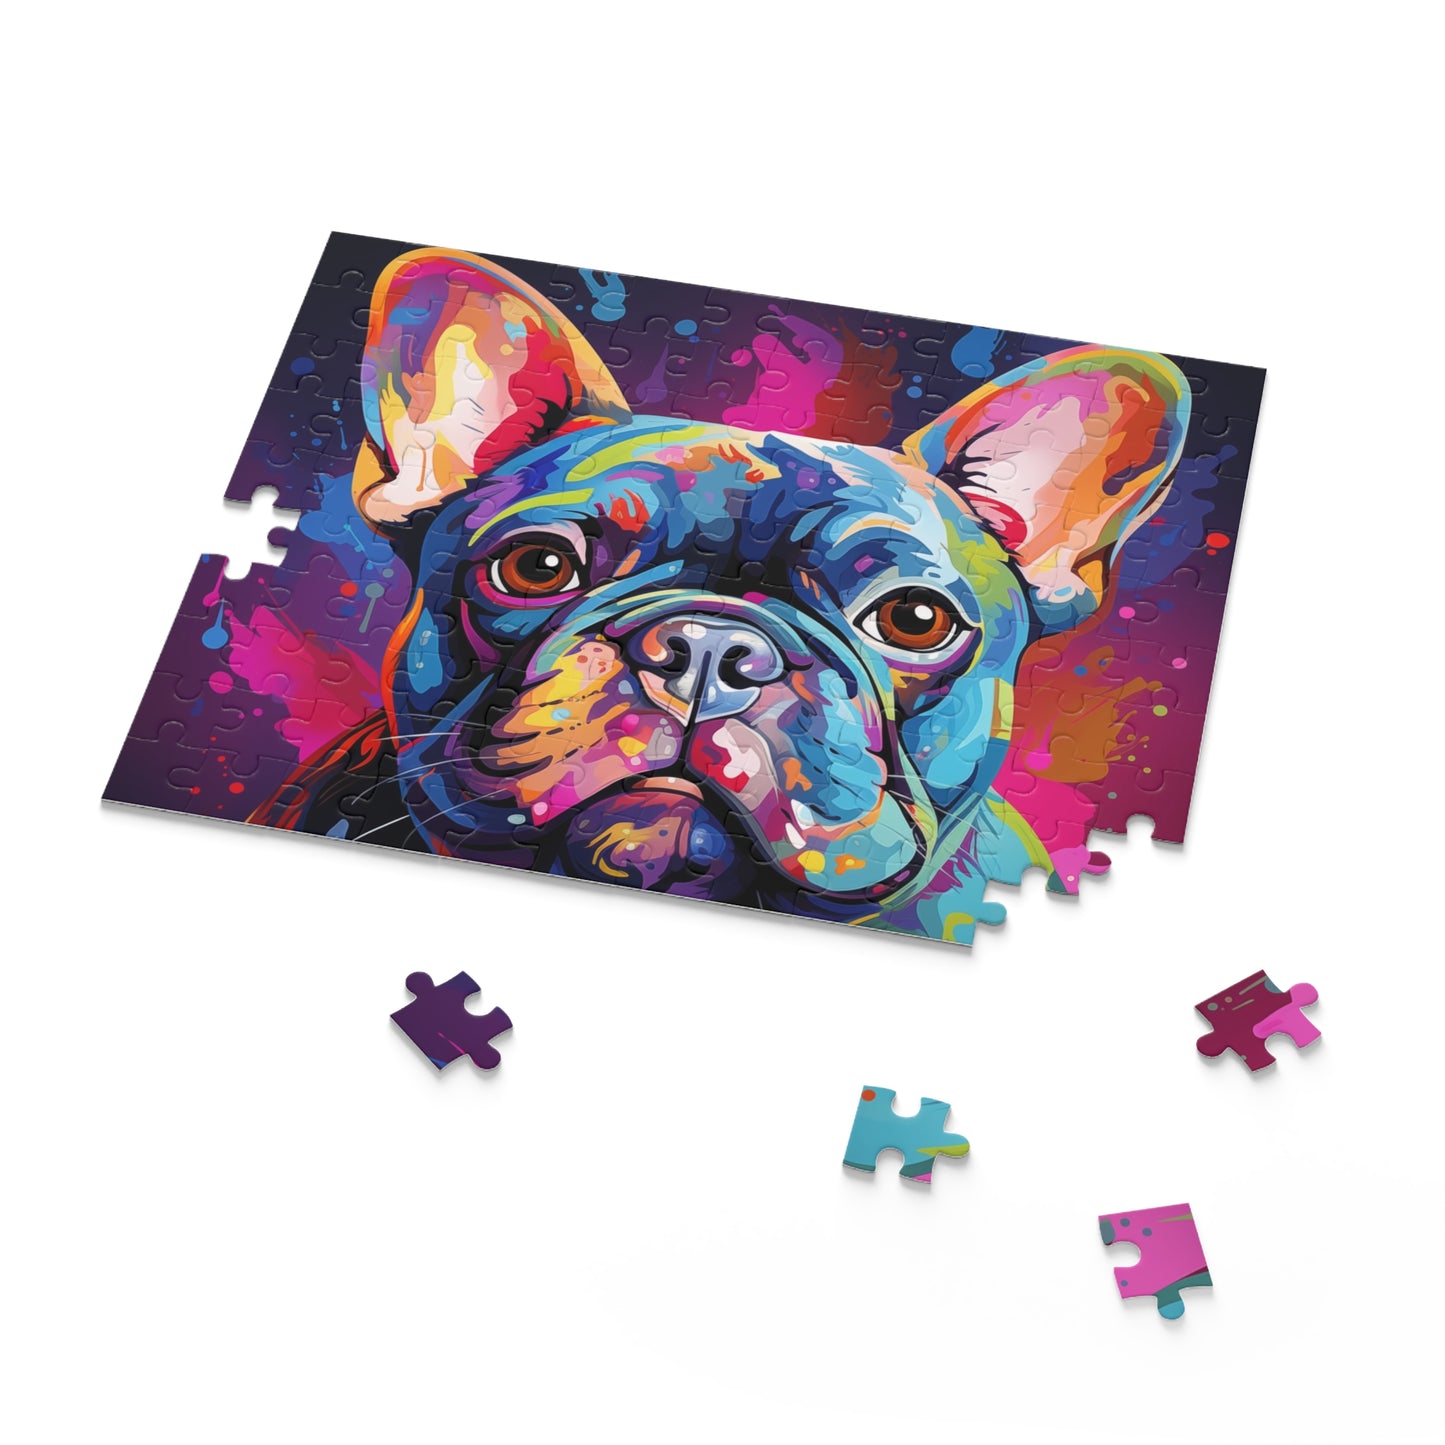 Oil Paint Watercolor Abstract Frenchie Dog Jigsaw Puzzle Adult Birthday Business Jigsaw Puzzle Gift for Him Funny Humorous Indoor Outdoor Game Gift For Her Online-7